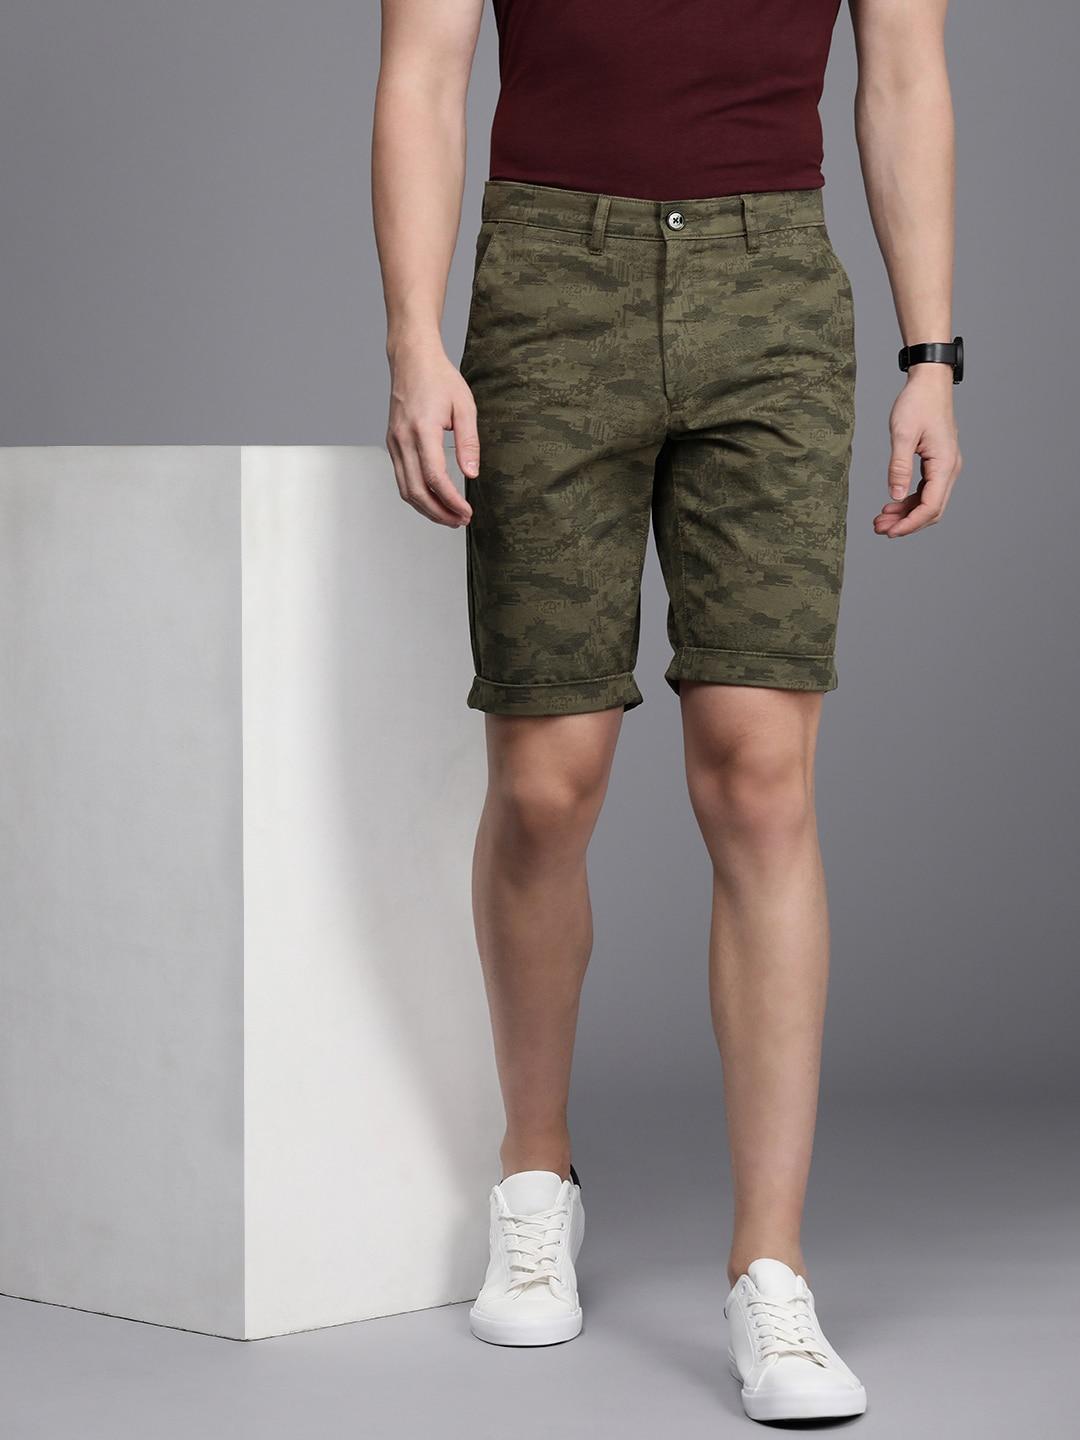 Allen Solly Men Abstract Slim Fit Pure Cotton Shorts